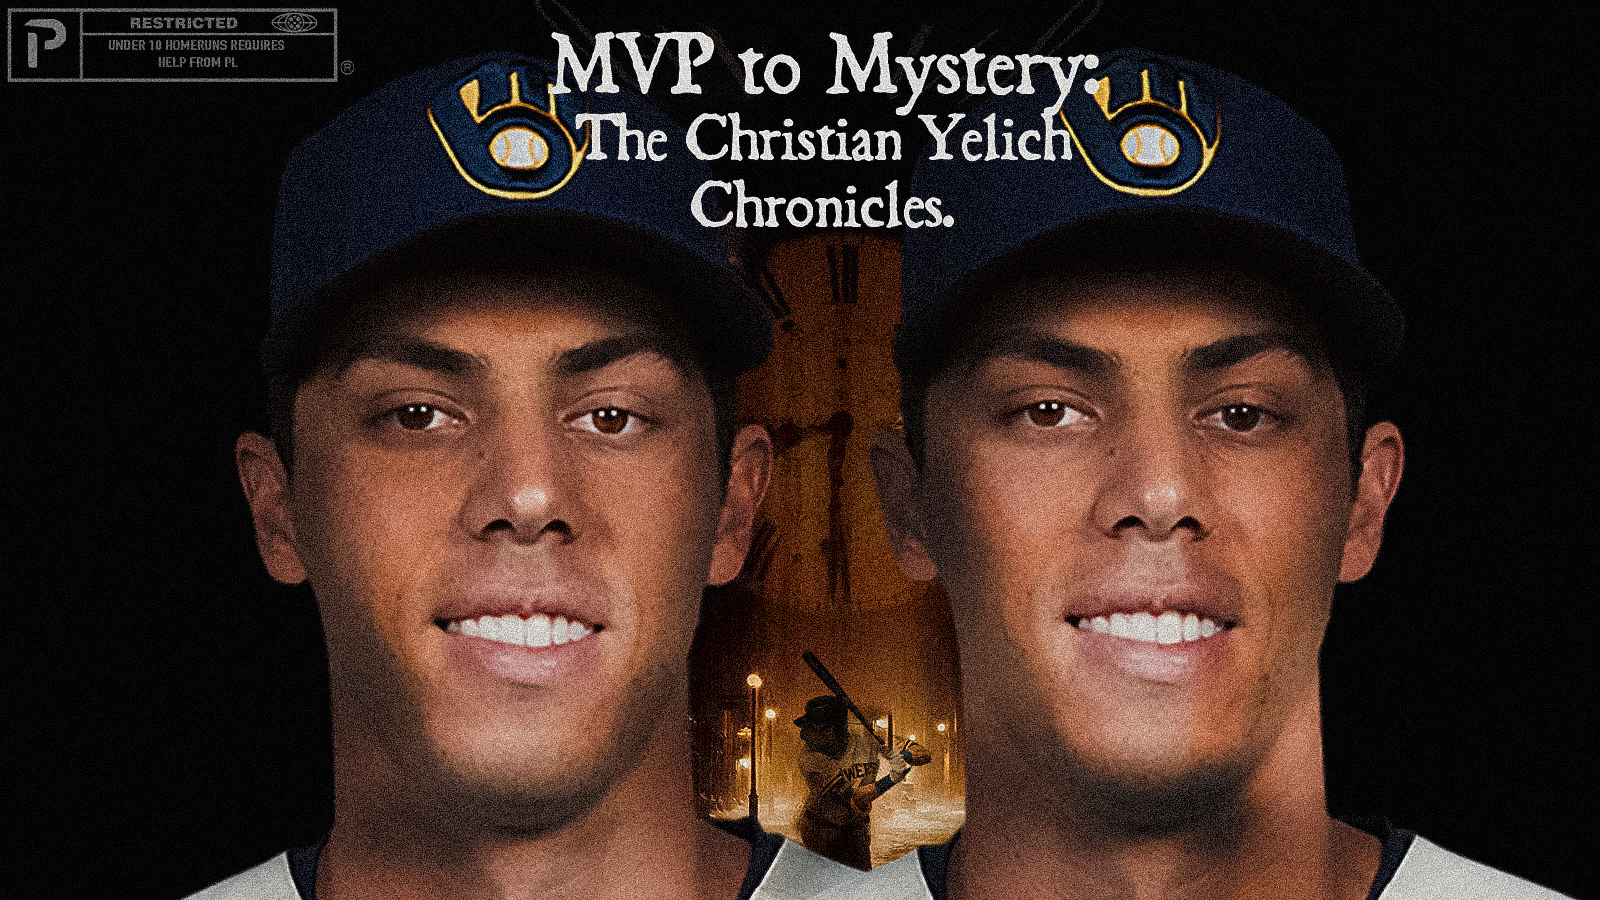 #ChristianYelich gets compared to #PeteDavidson every game? #mlb #M